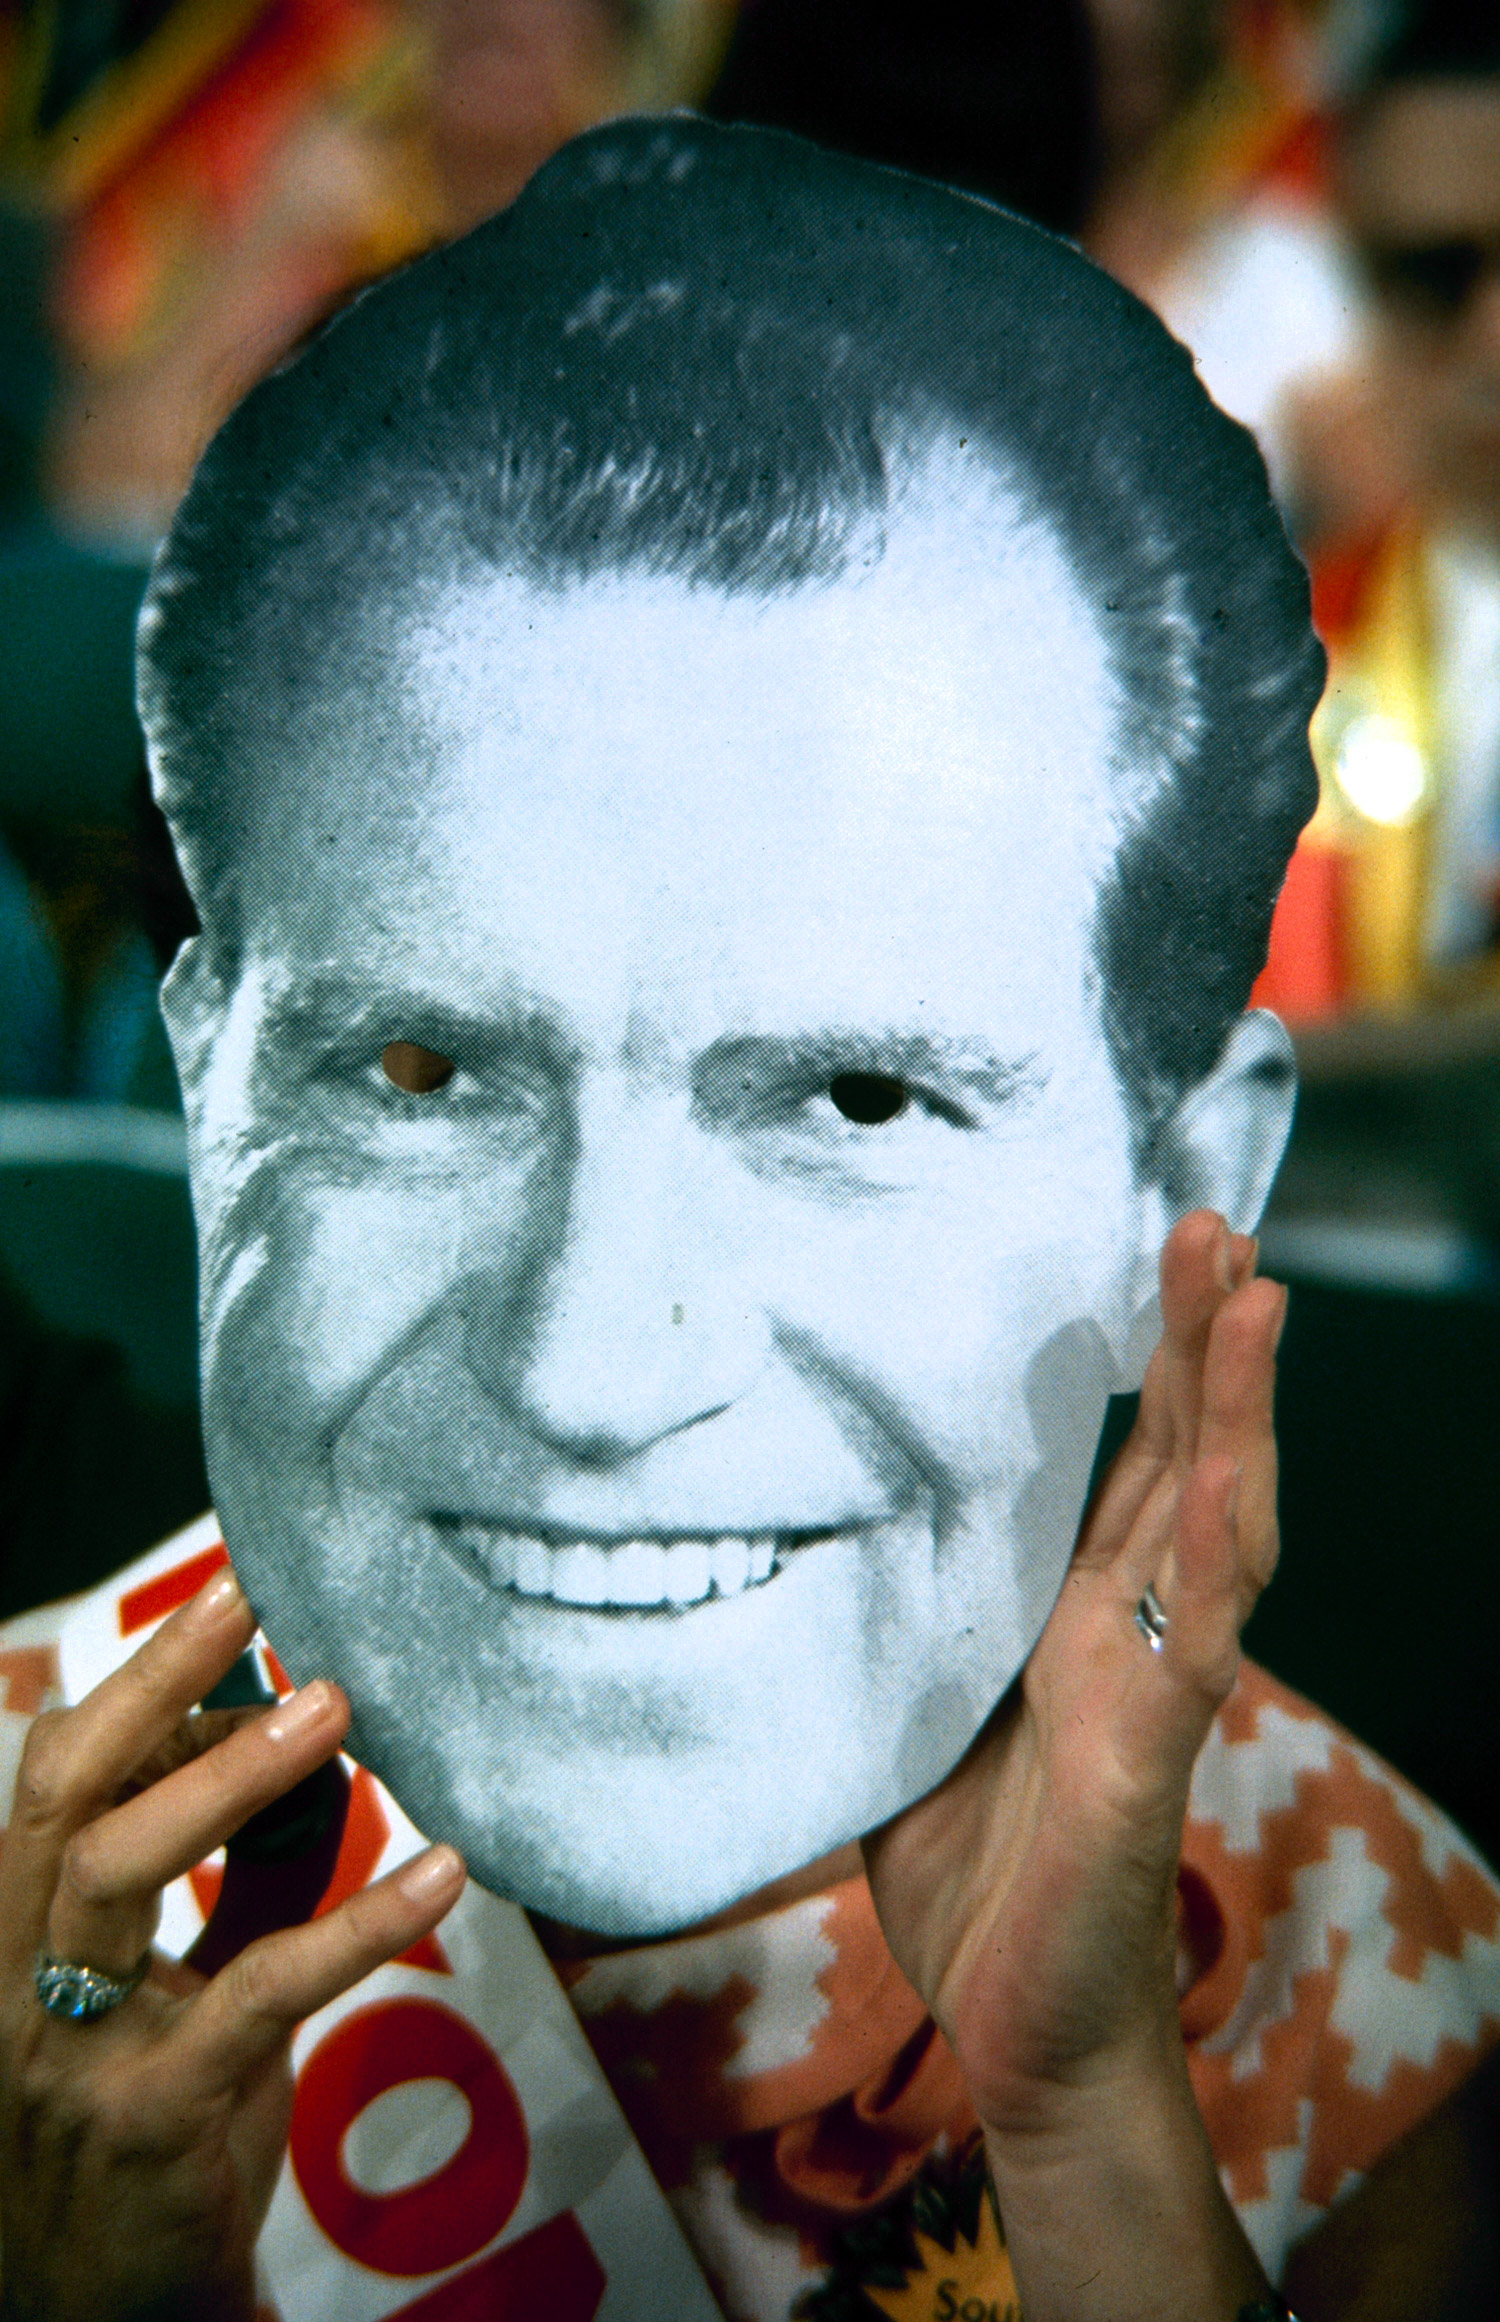 Richard Nixon supporter at the Republican National Convention, 1968.